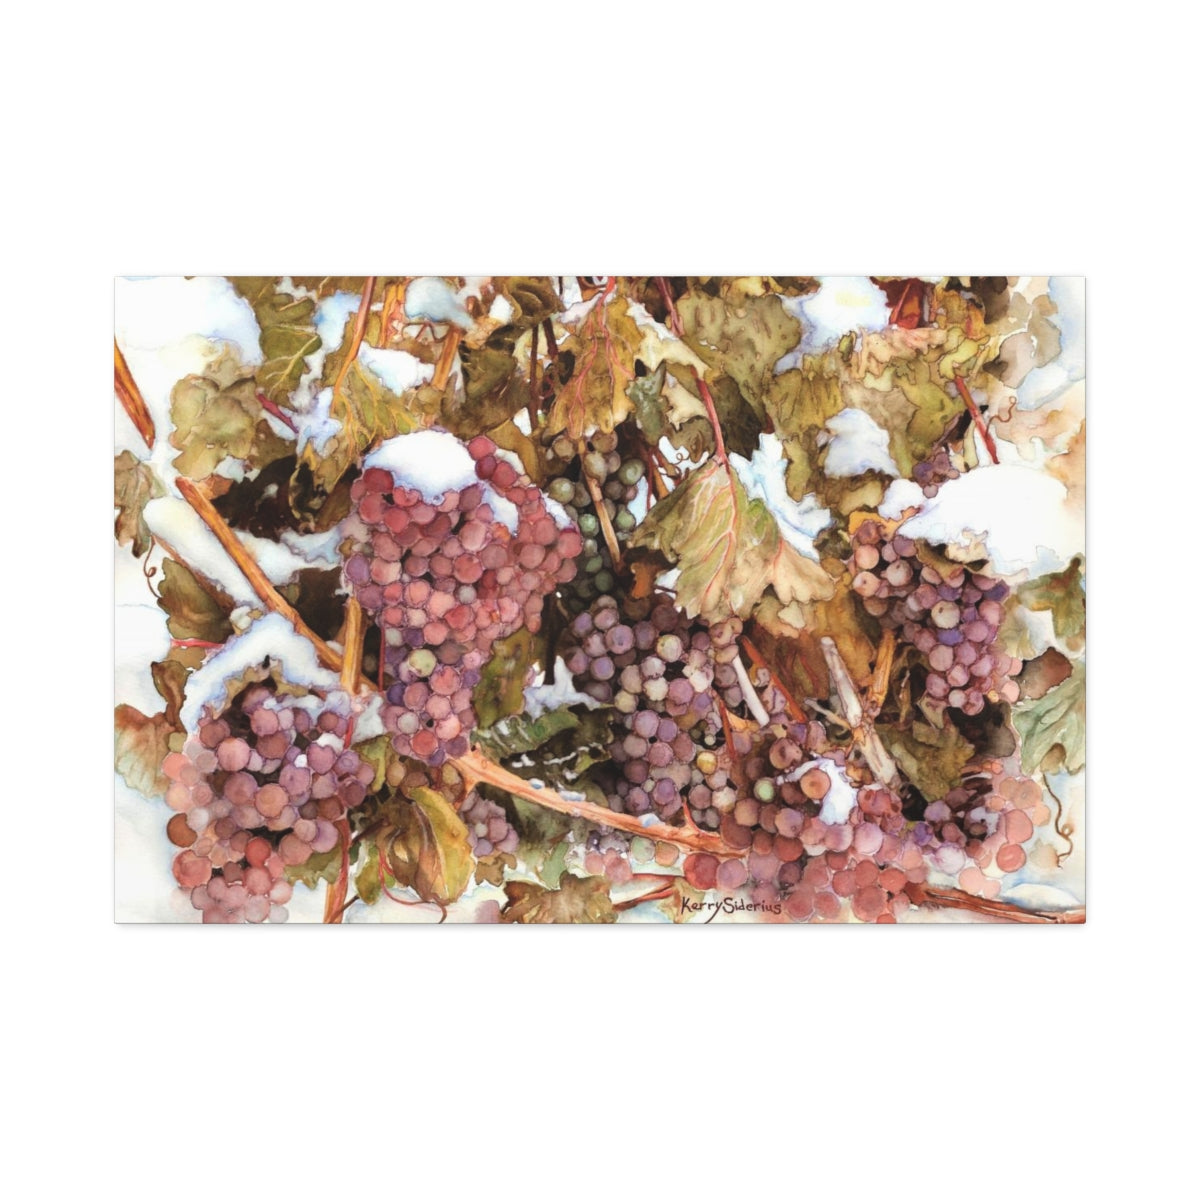 "Snowy Grapes in Chelan" Canvas (6 Sizes Available) - Kerry Siderius Art 